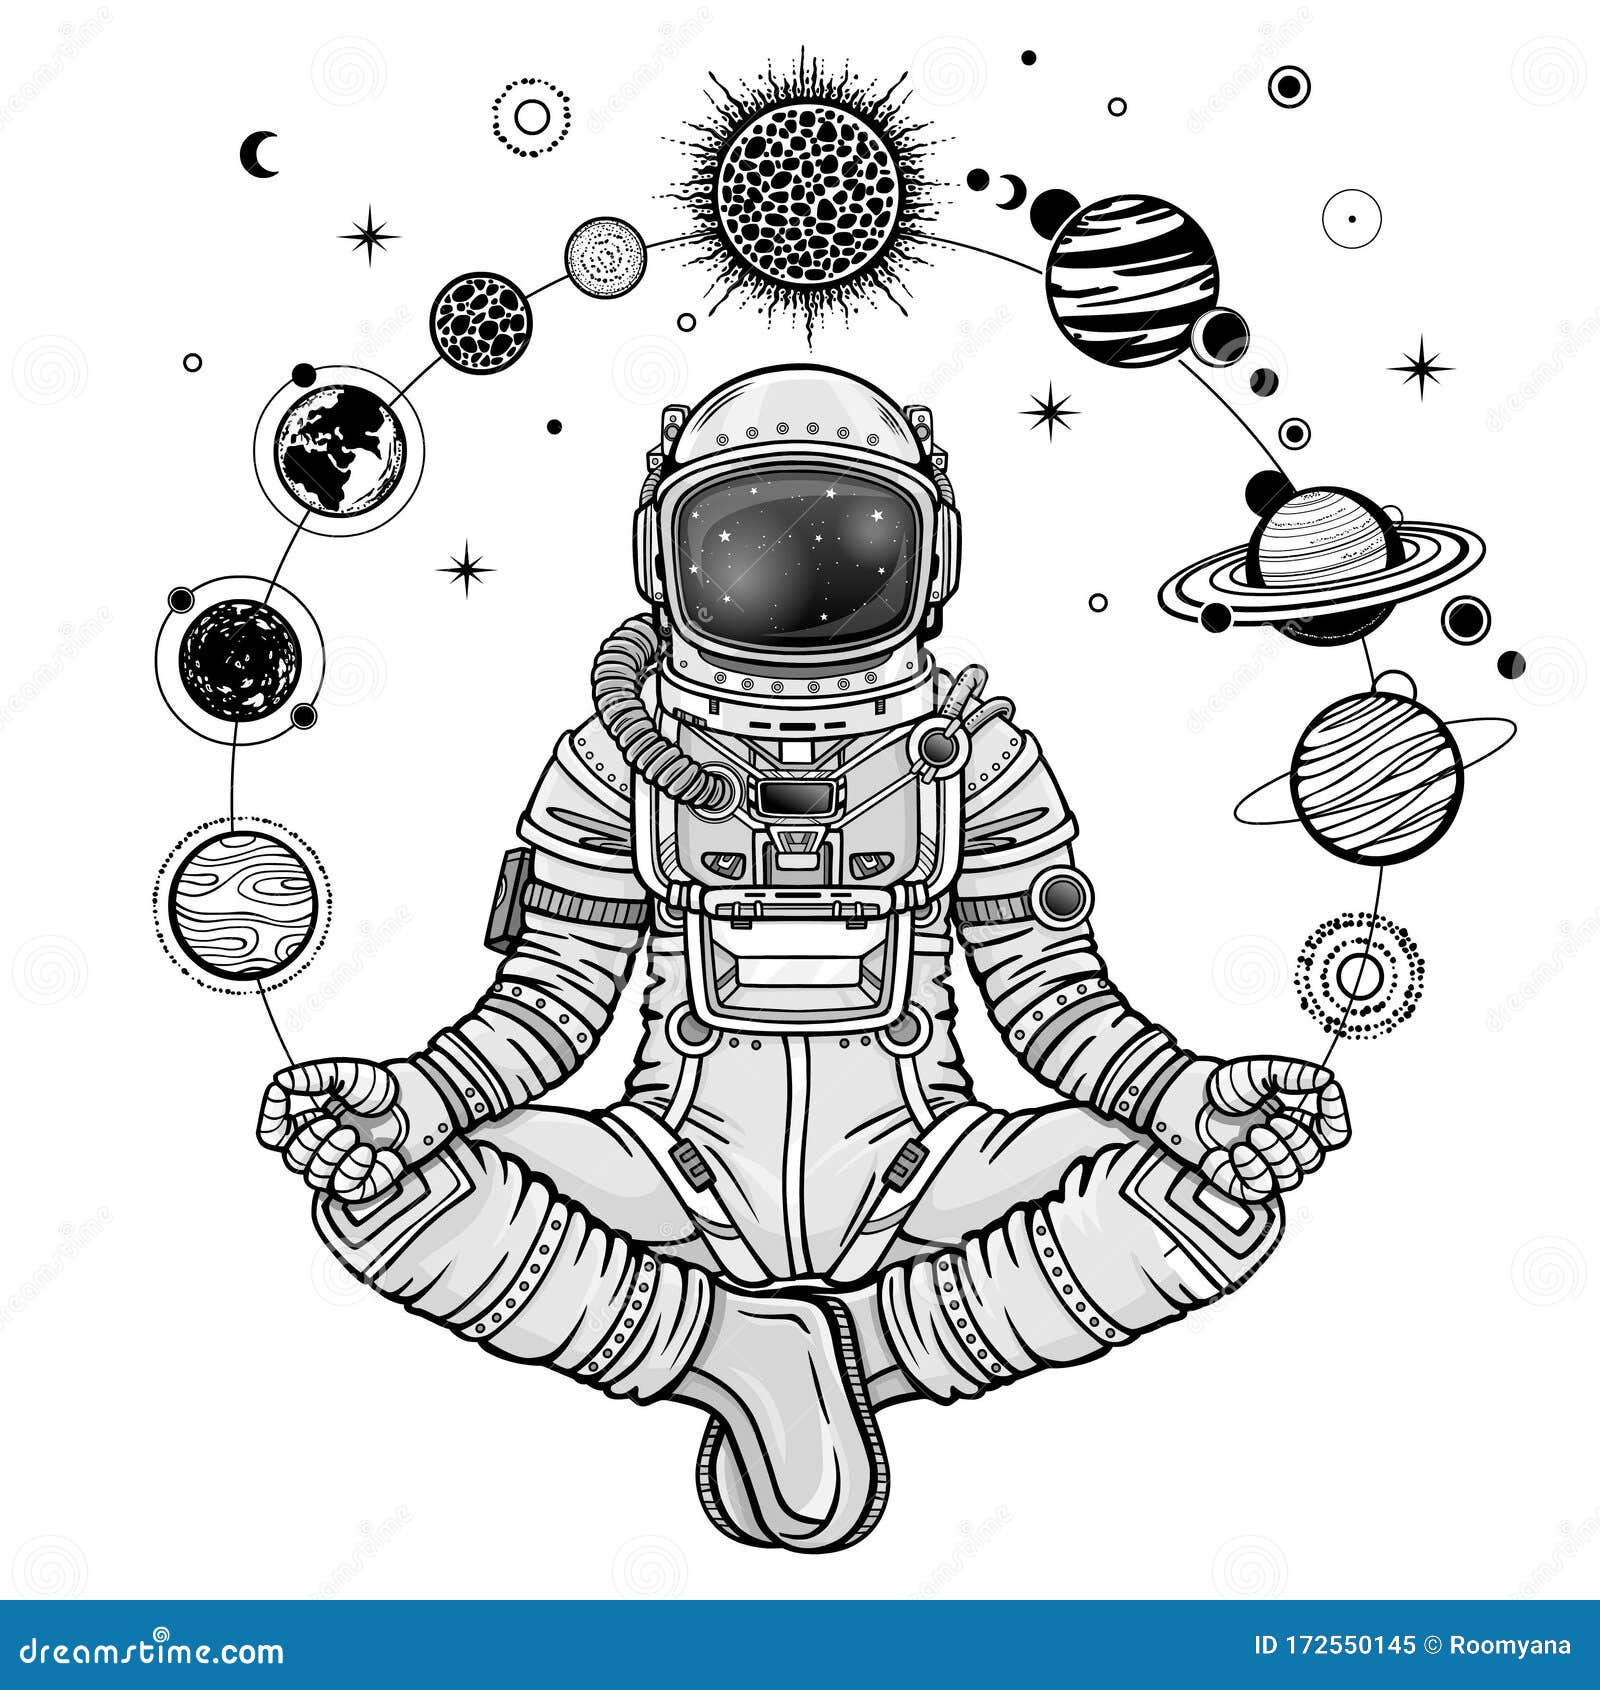 monochrome drawing: animation astronaut in a space suit holds planets of the solar system.